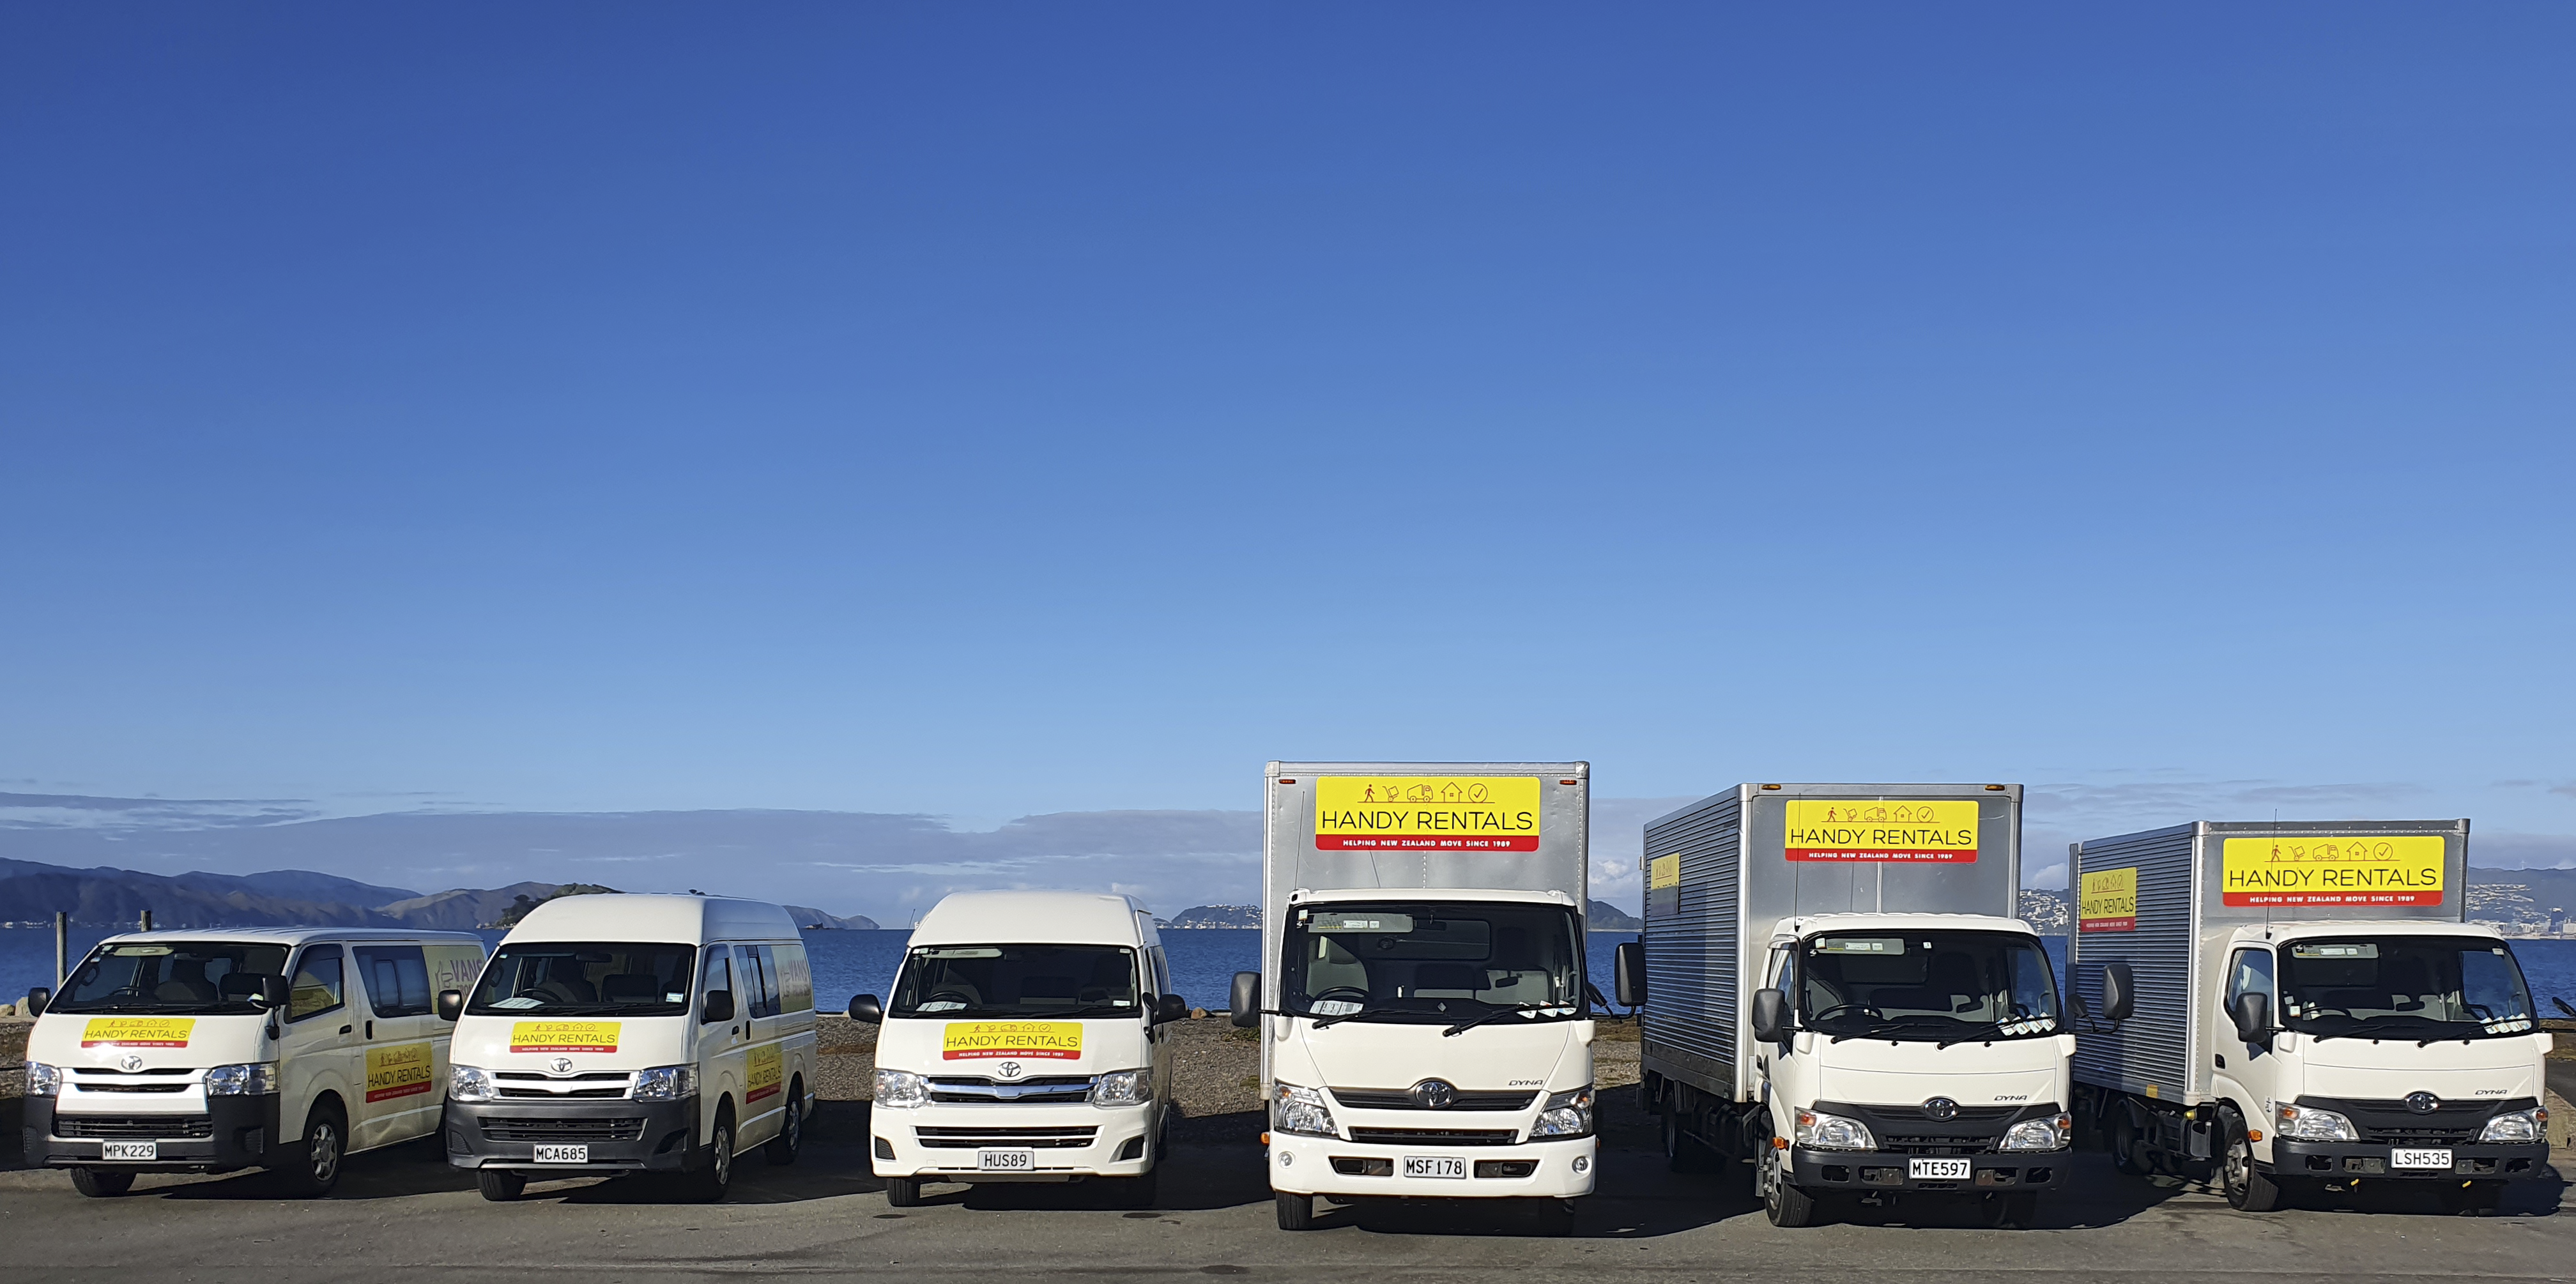 Variety of commercial vans and trucks available for hire